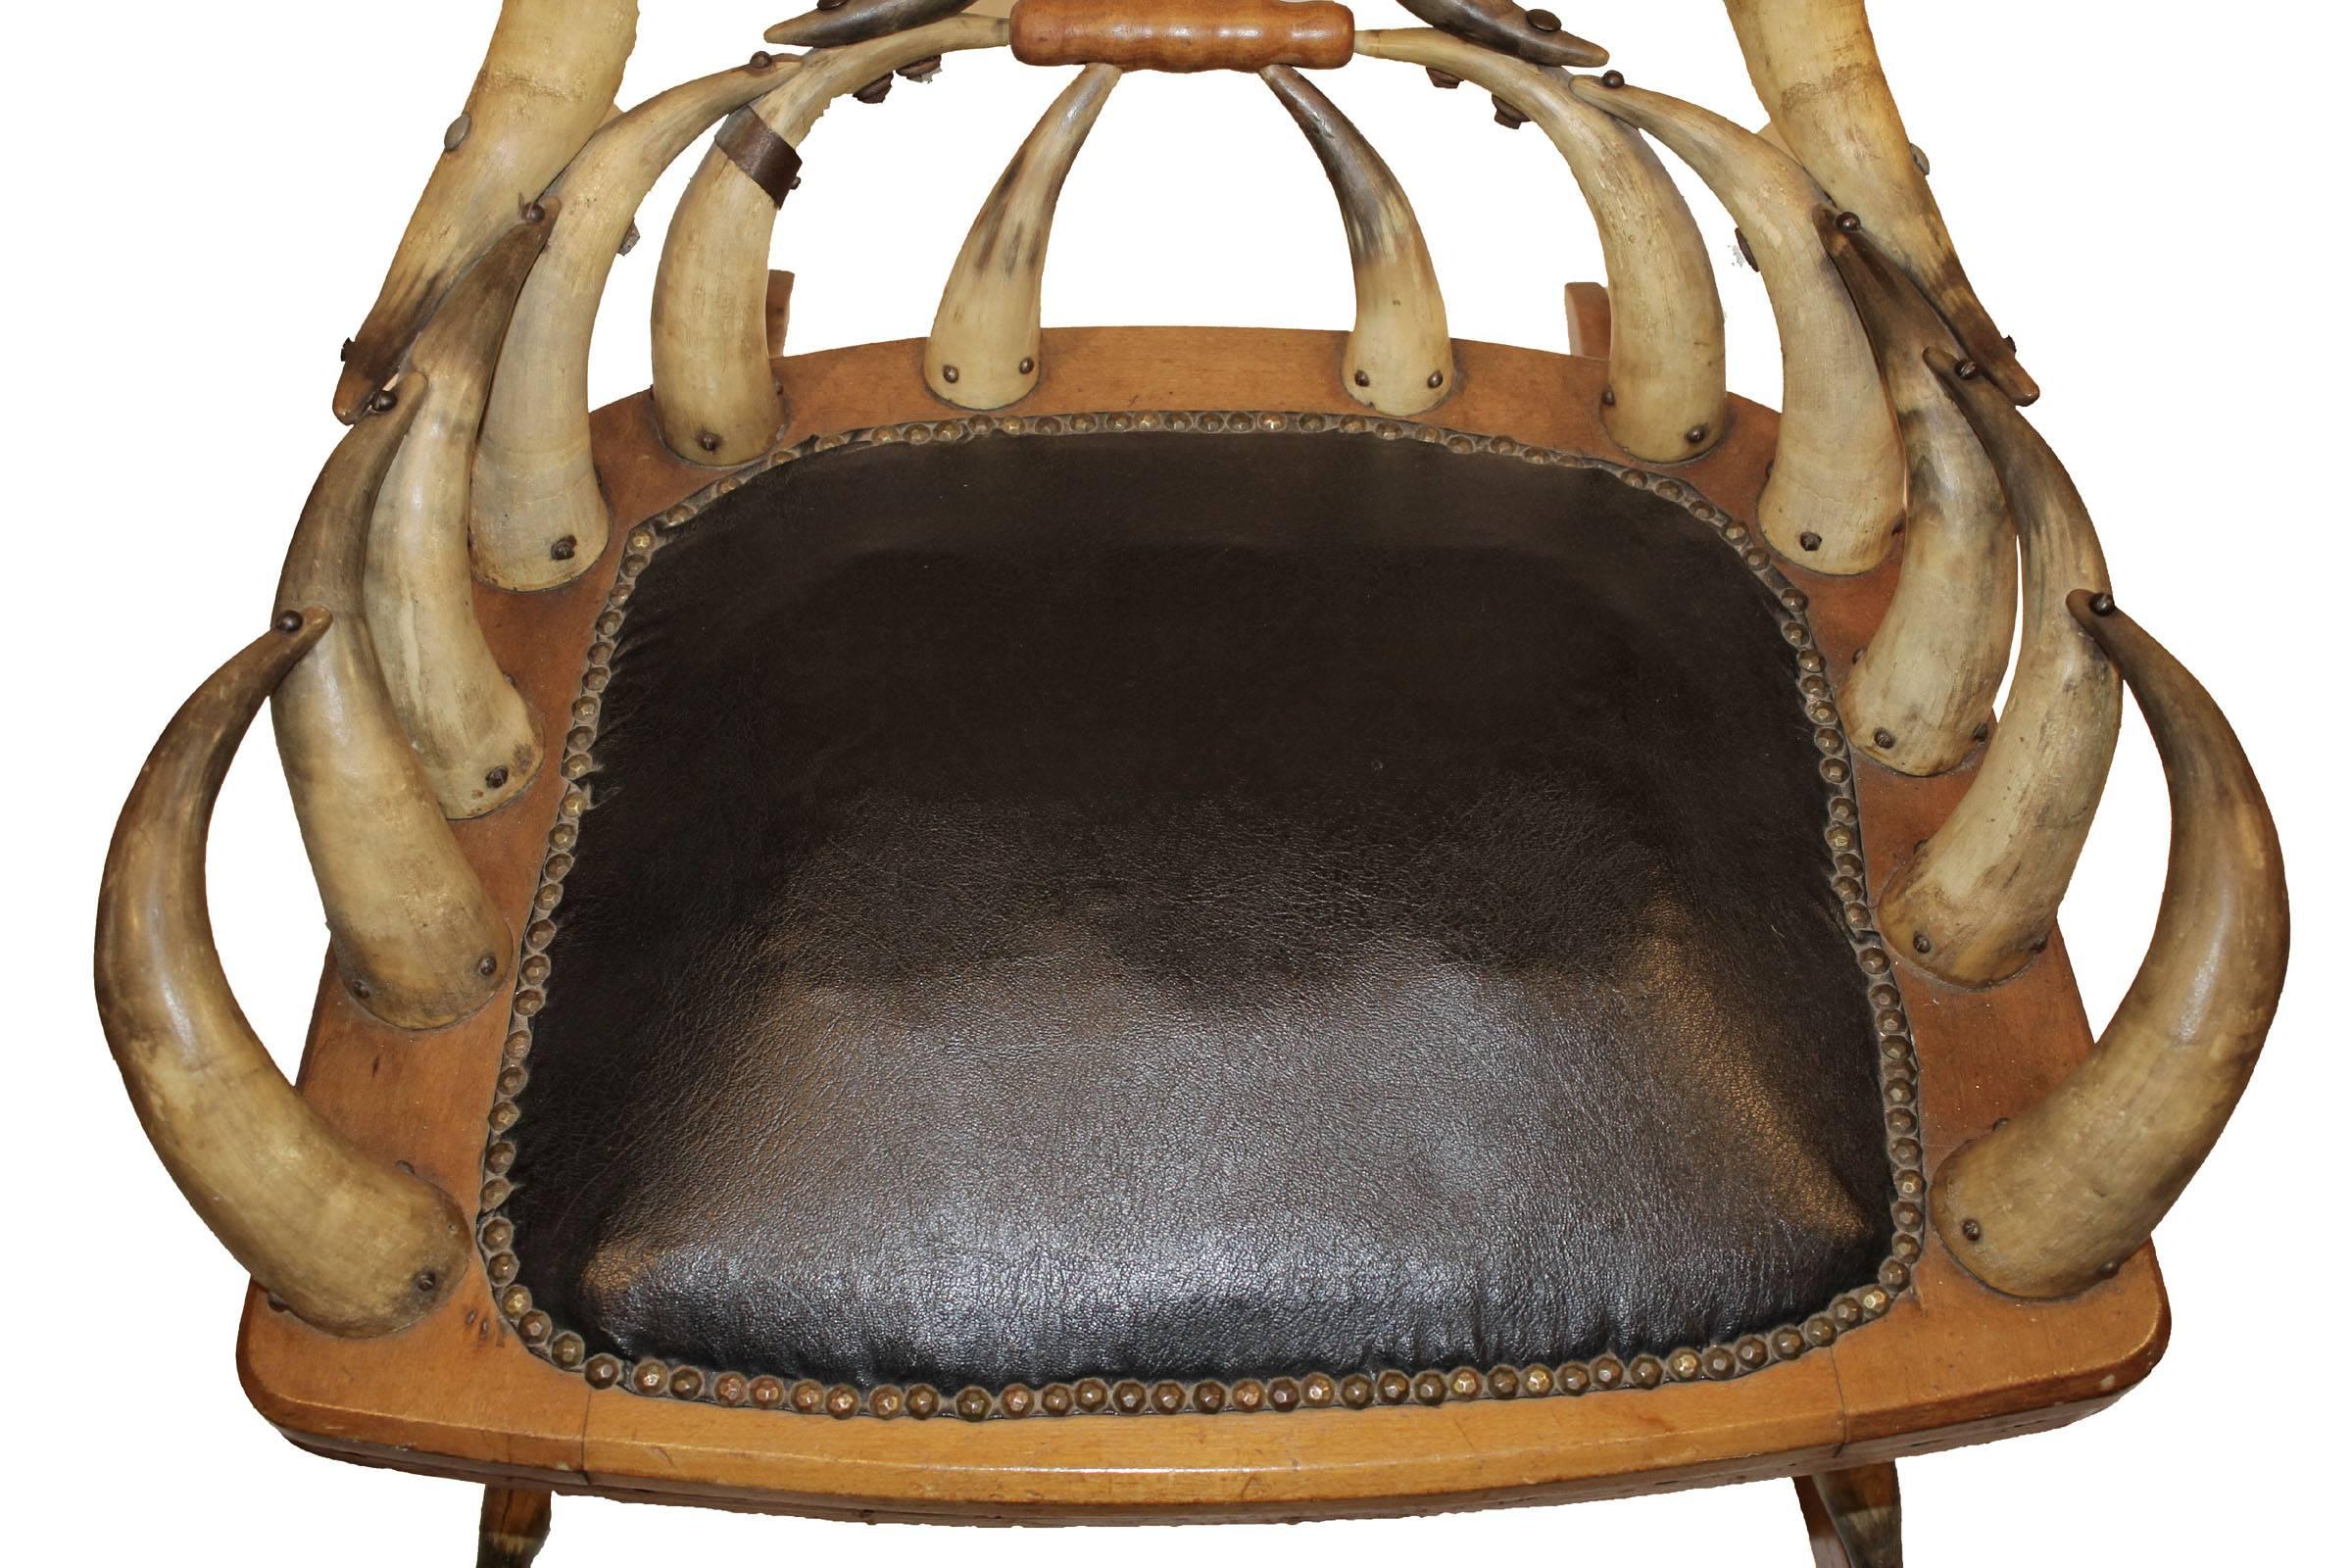 The Horn chair was a popular furniture fixture throughout the Victorian era and is still fashionable with today's designers. Adding unique sizzle to any space this piece is in great condition for its age. Attributed to Wenzel Friedrich this rocker